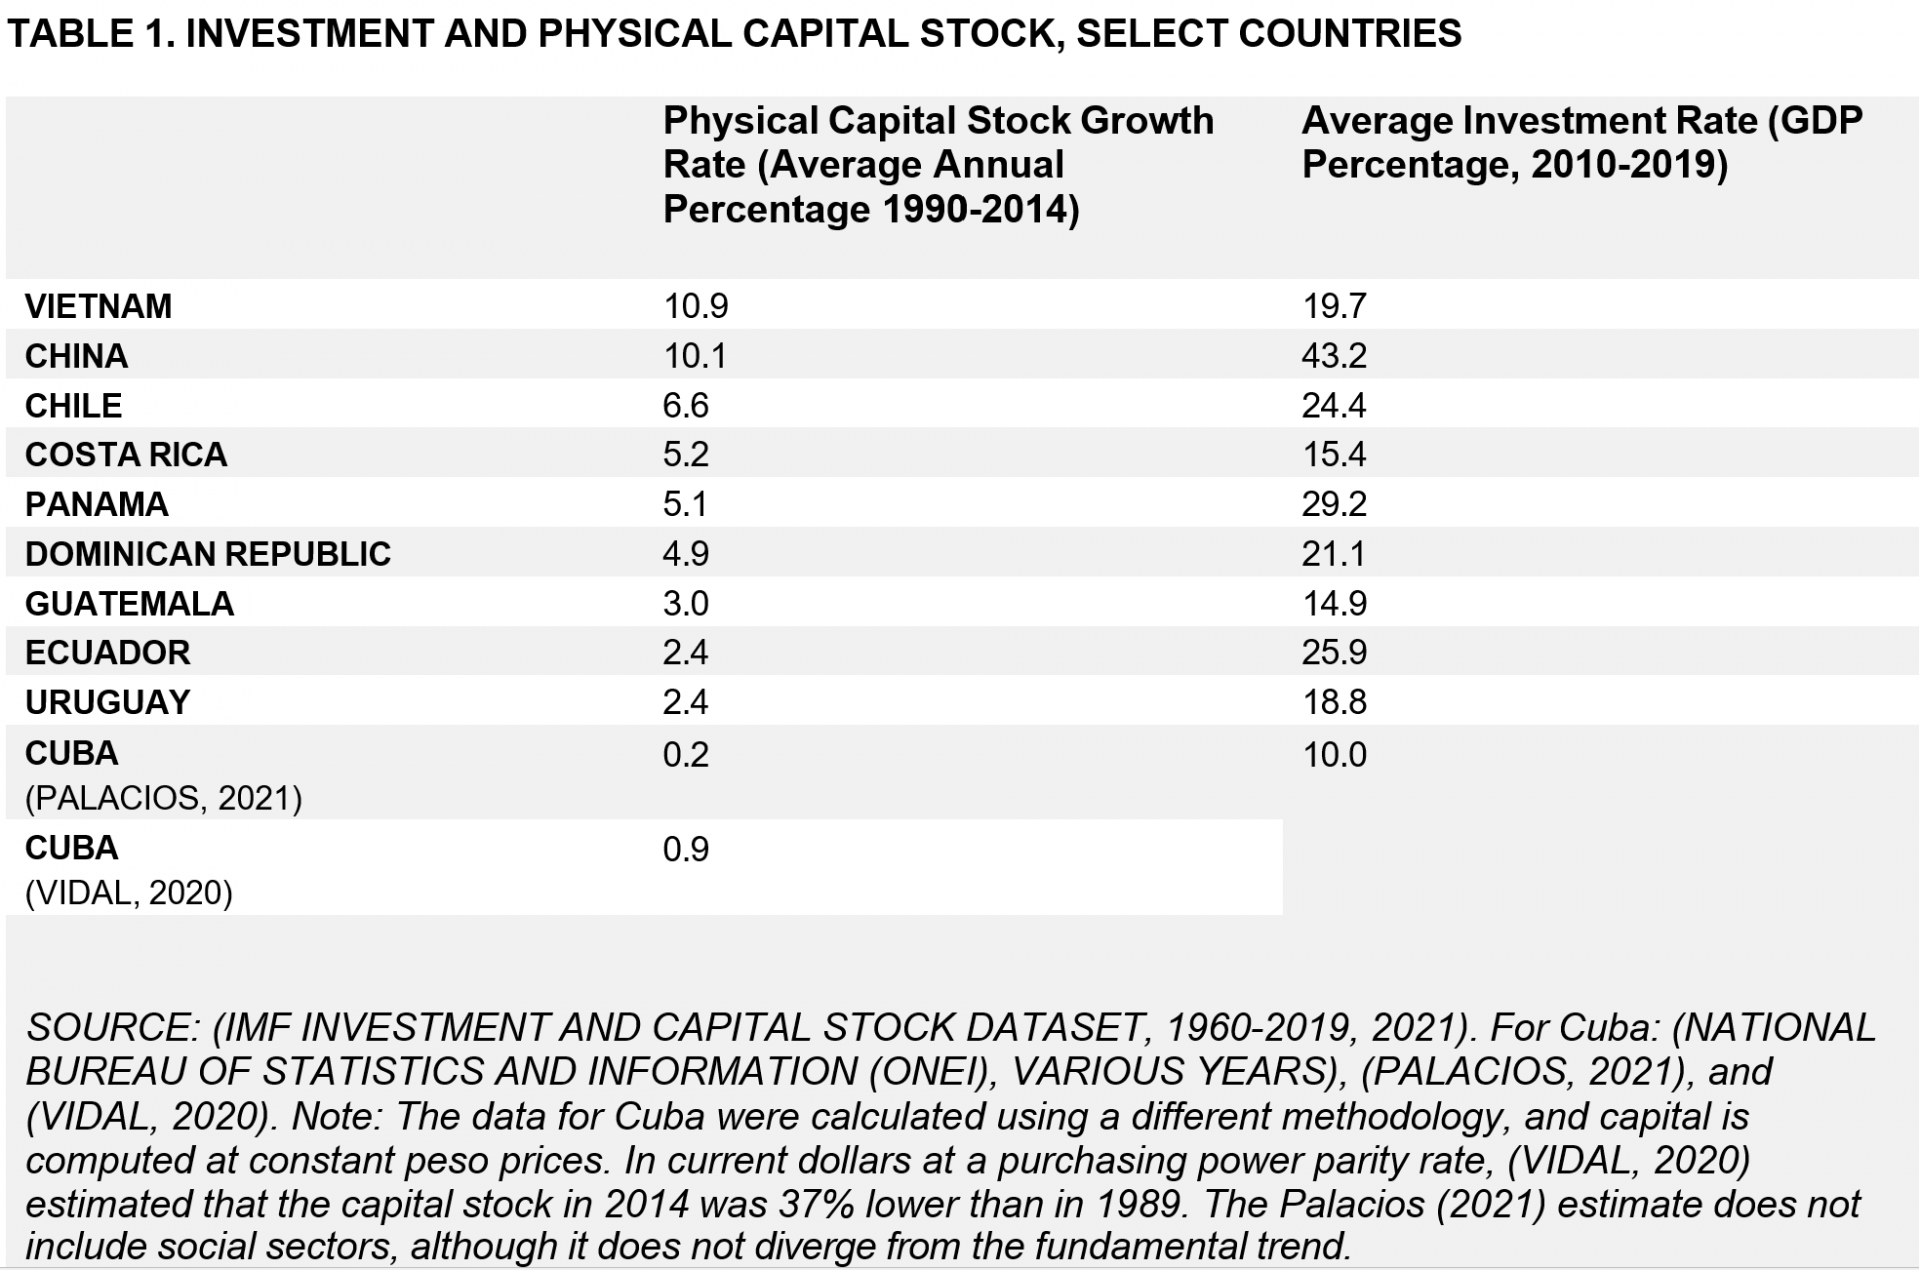 Table 1 shows the physical capital investment, the selected countries and the growth rates of the physical capital stock and the average investment rate.